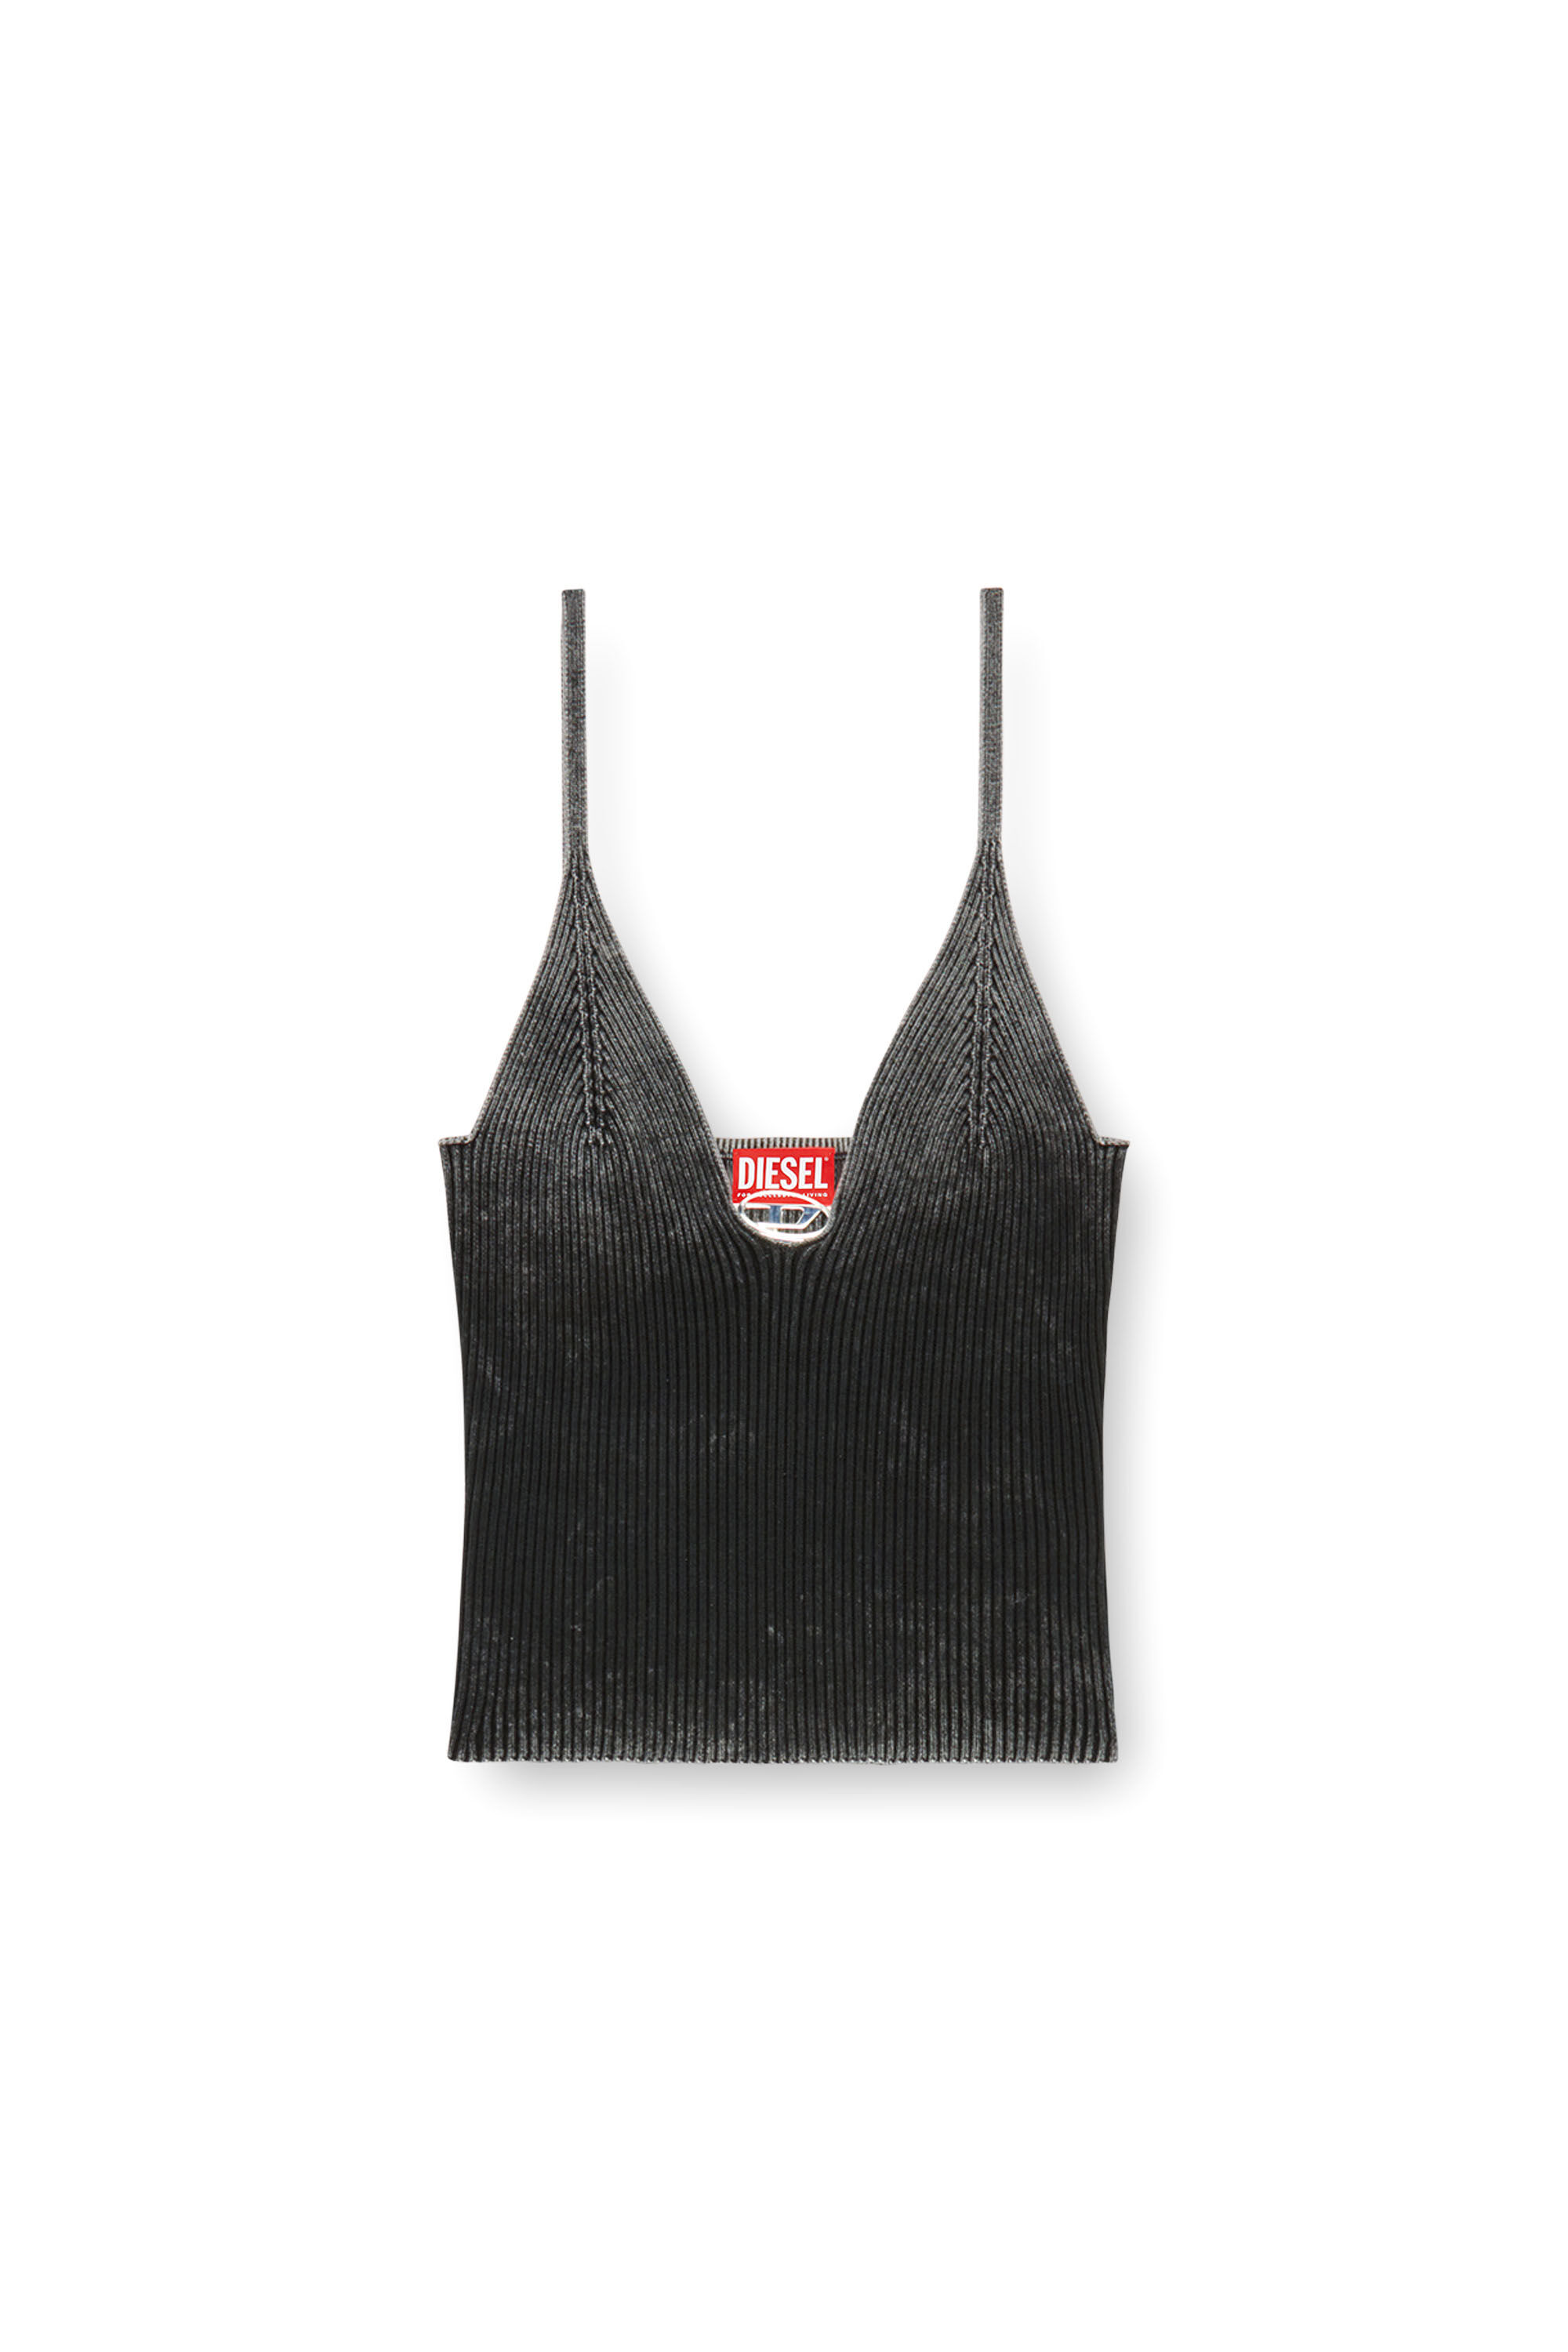 Diesel - M-LAILA, Female Camisole in faded ribbed knit in ブラック - Image 2